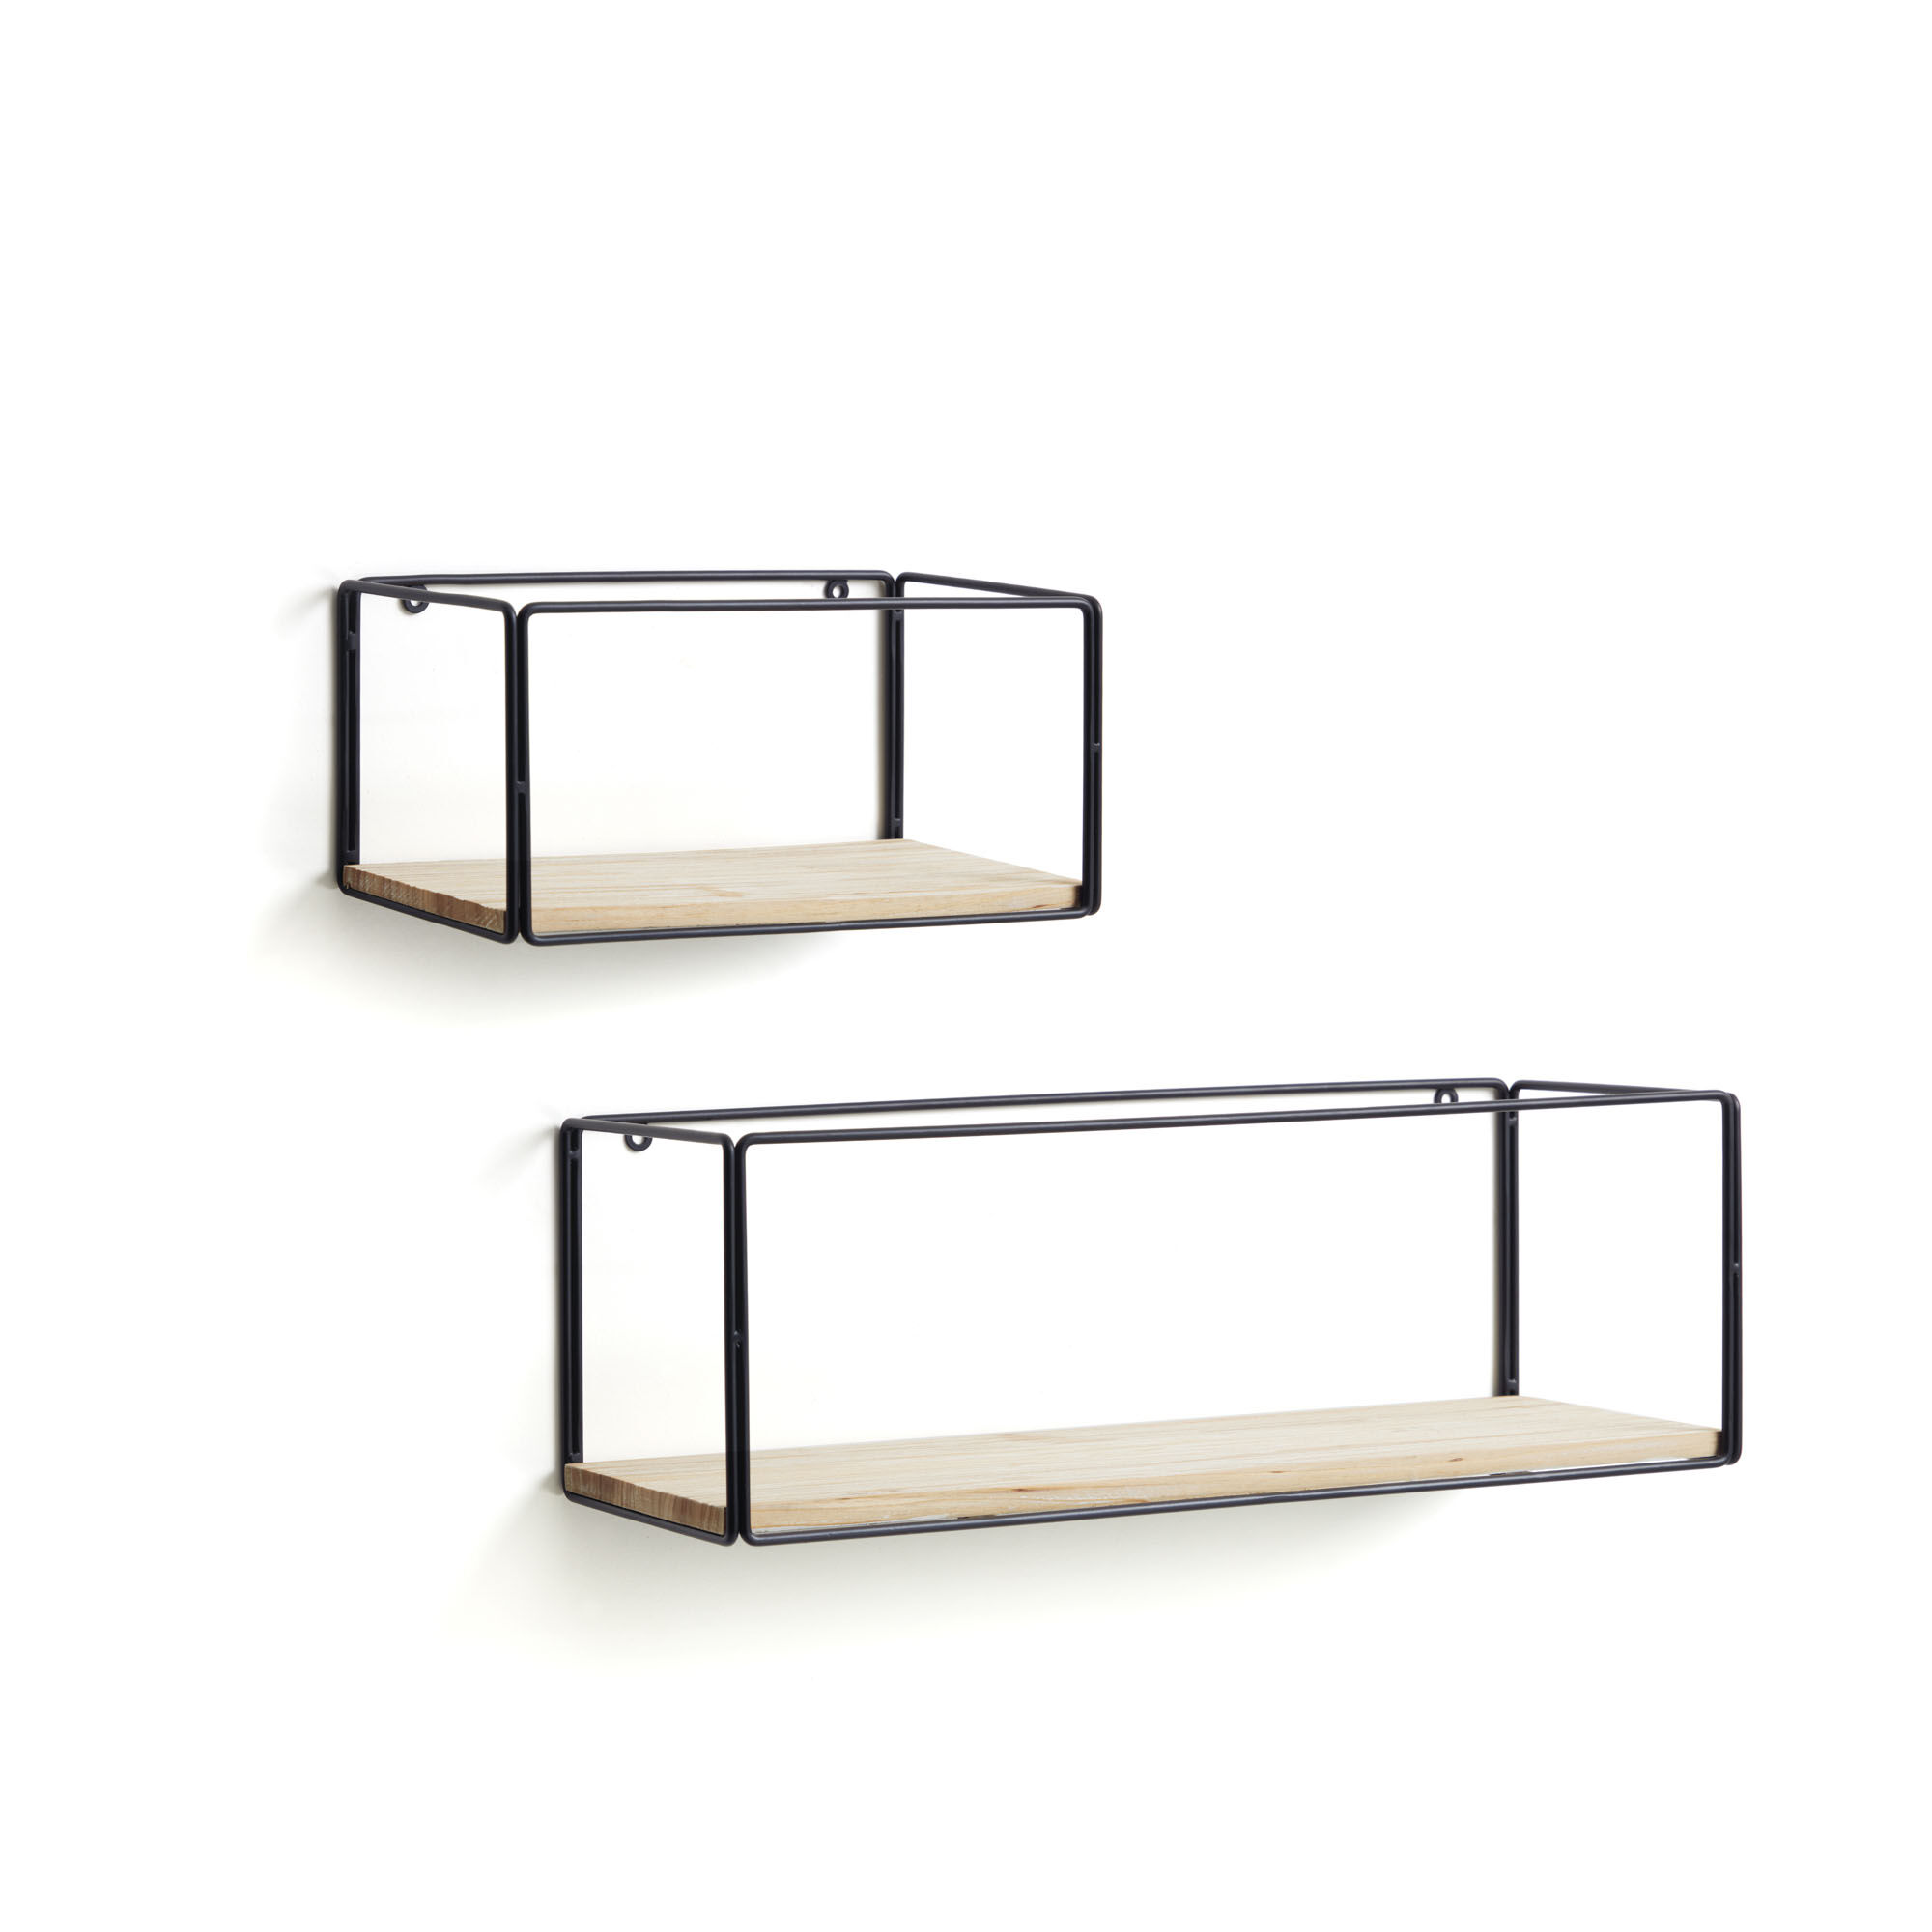 Kave Home Nezz set of two shelves in solid fir and black steel 30 x 15 and 50 x 17 cm